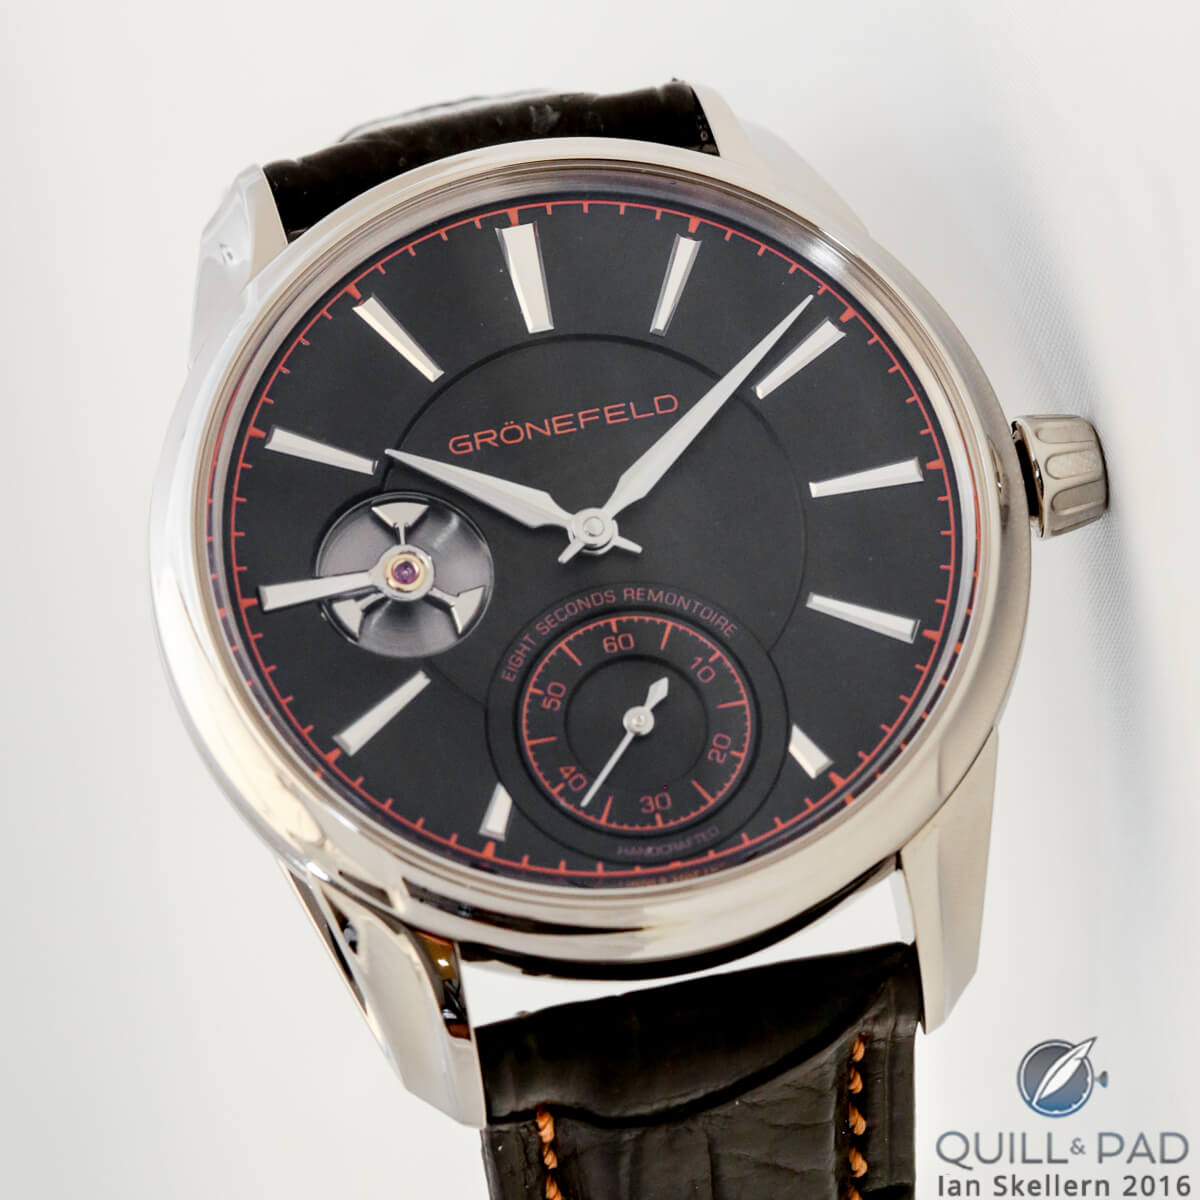 Gronefeld 1941 Remontoire in white gold with black solid silver dial